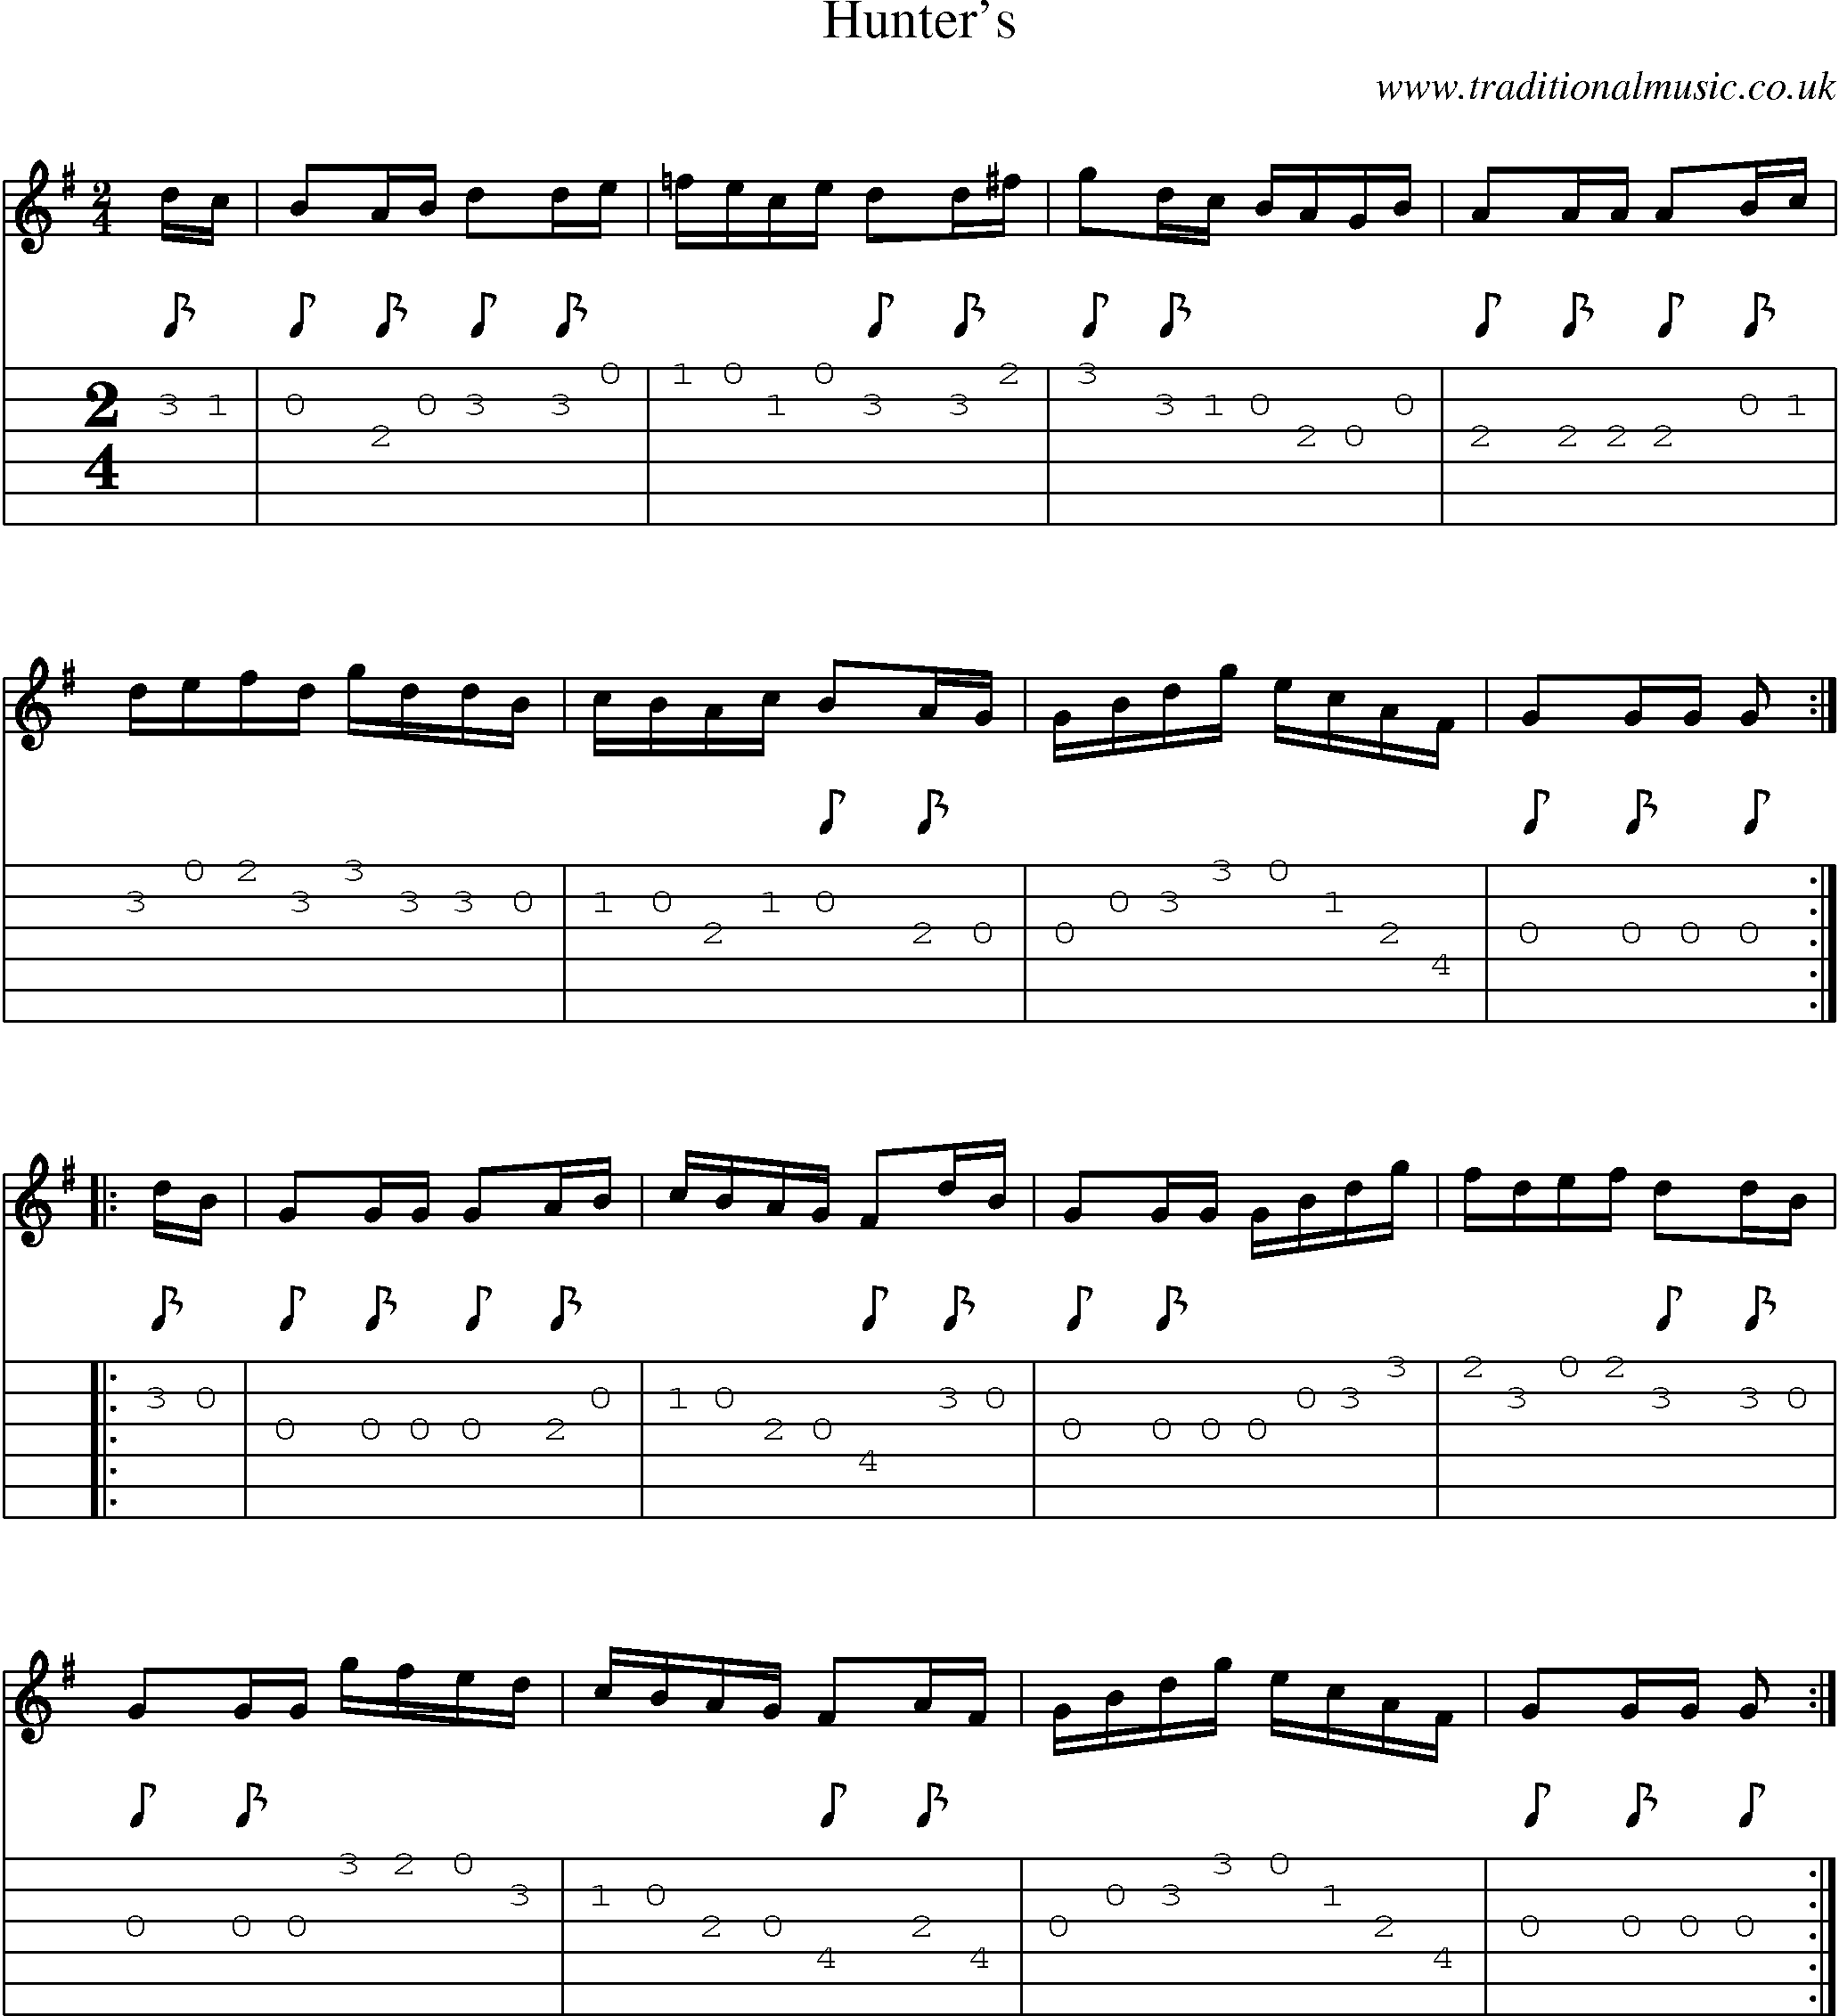 Music Score and Guitar Tabs for Hunters